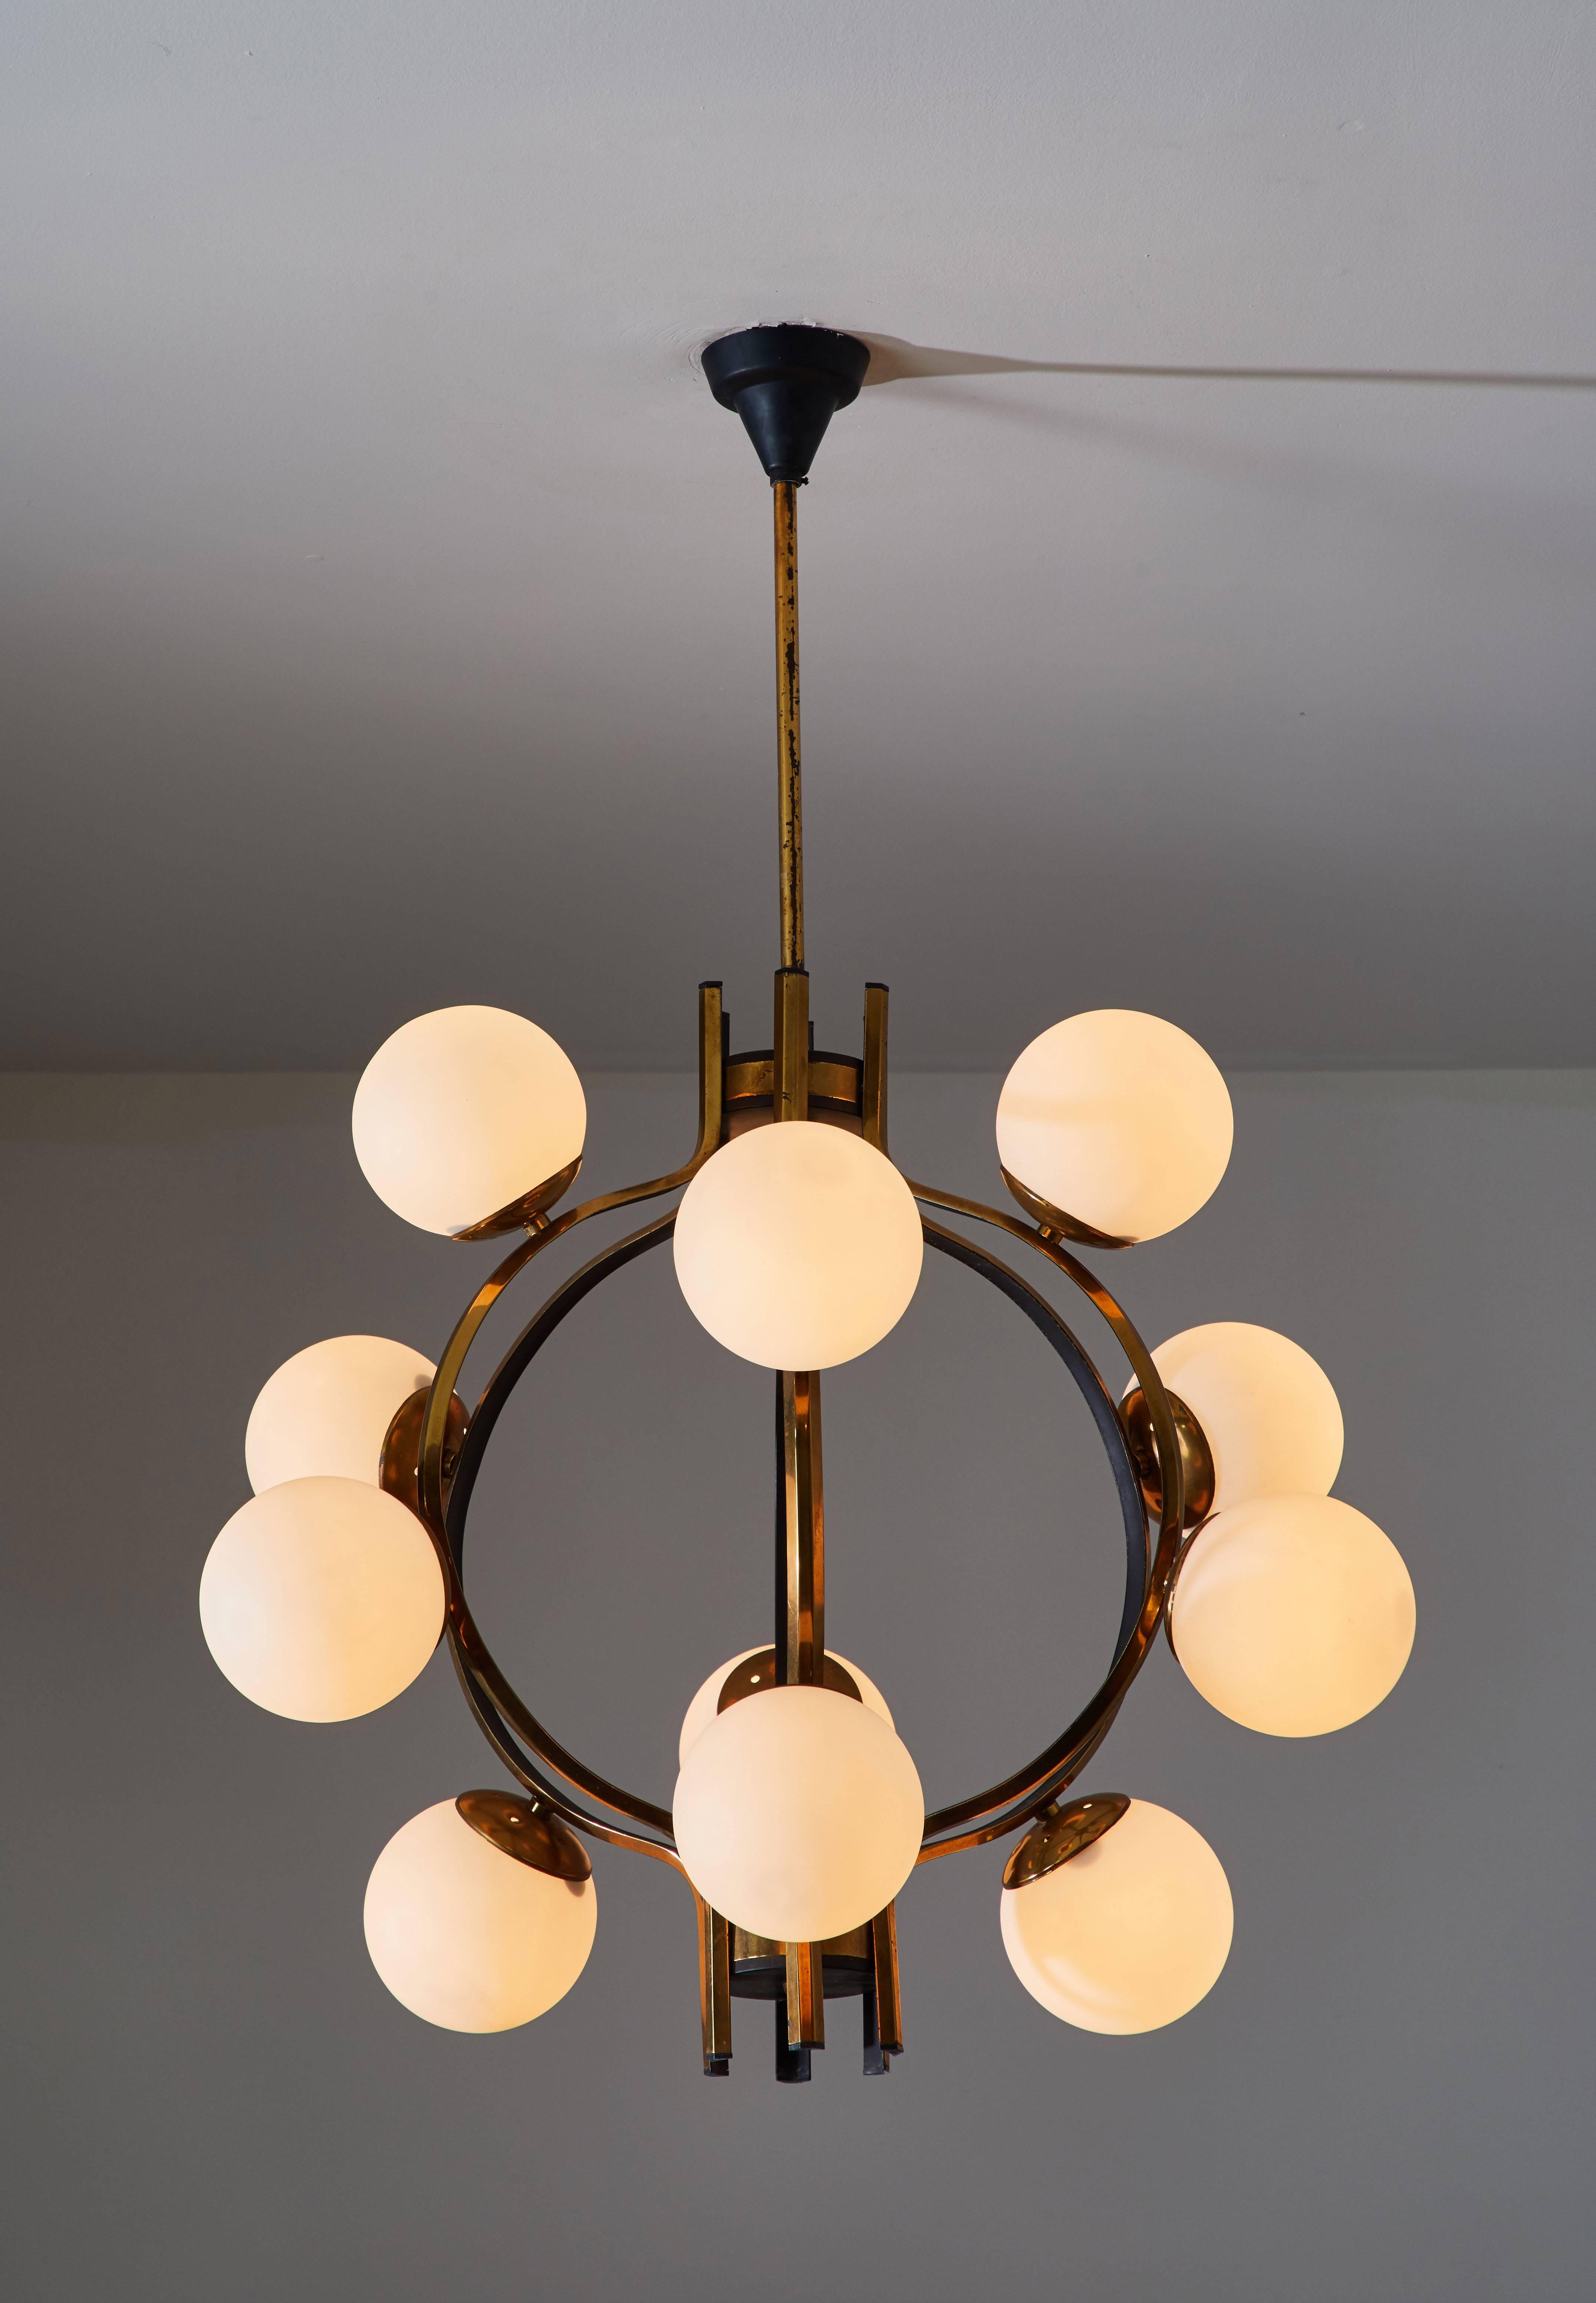 Twelve globe chandelier manufactured by Stilnovo in Italy circa 1950s. Brass, enameled metal and brushed satin glass globes. Wired for US junction boxes. Original stem and canopy. Overall drop can be adjusted. Each globe takes one E14 25w maximum